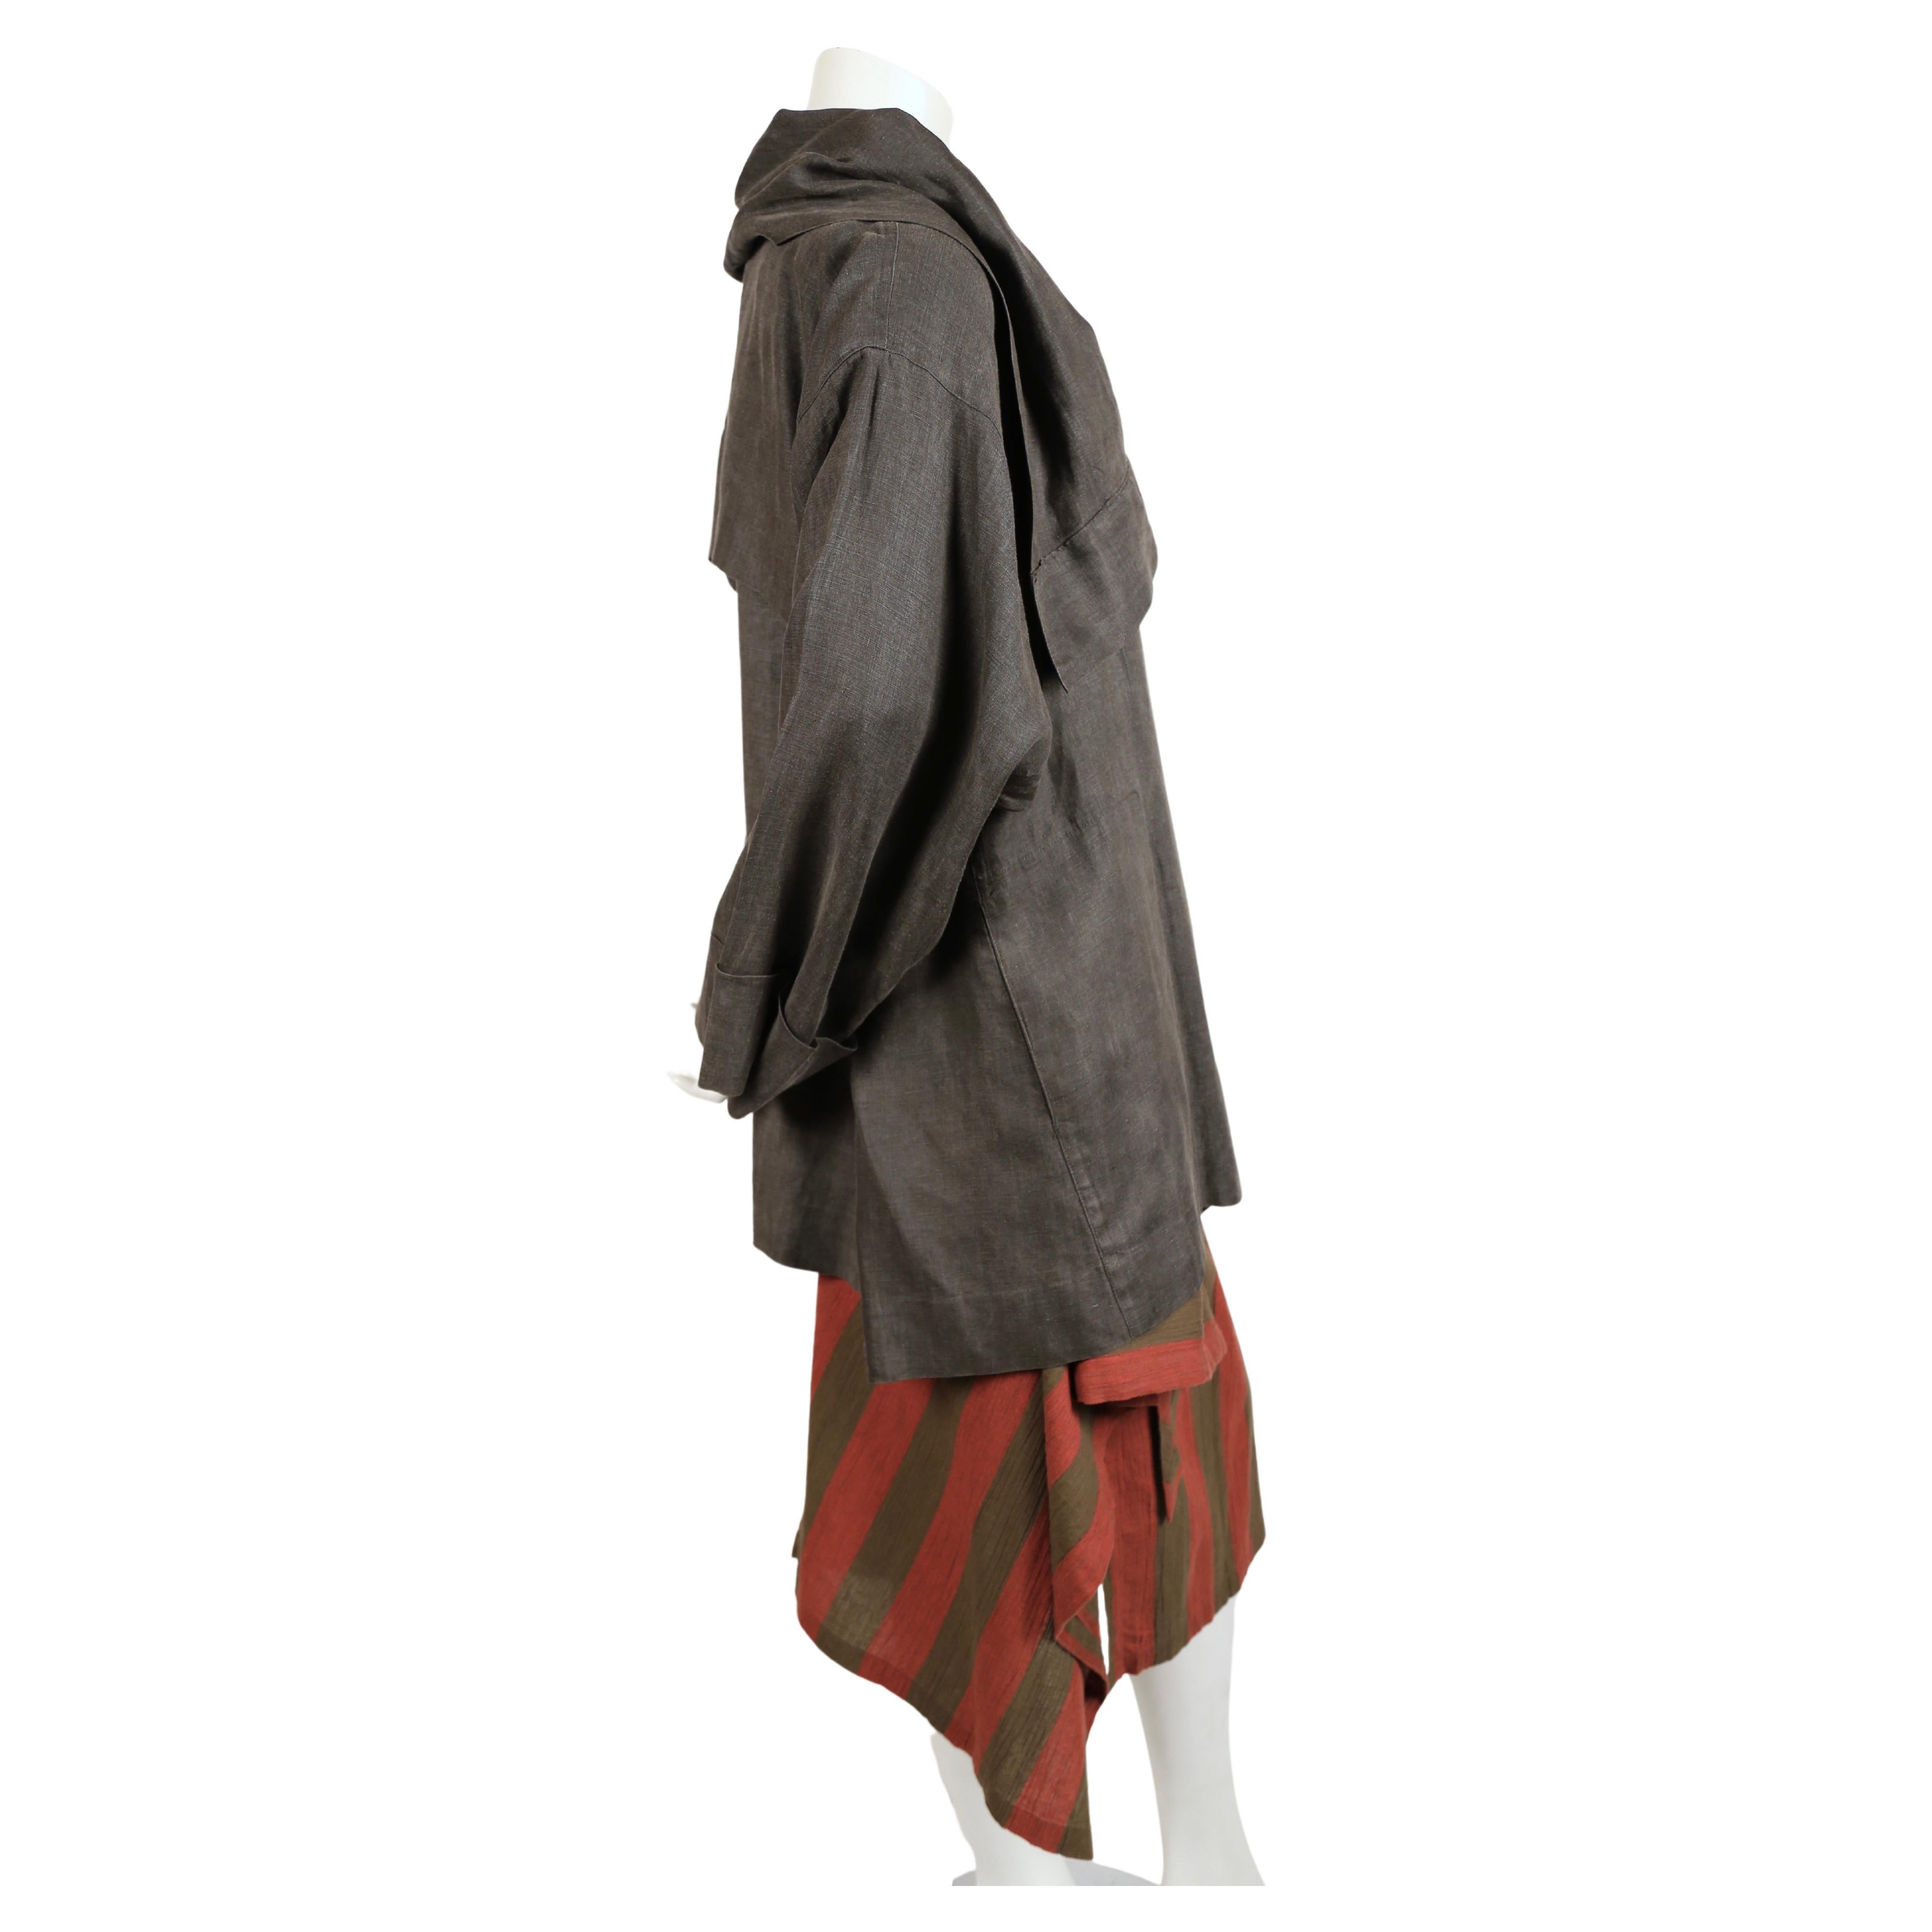 Draped grey linen jacket with unique khaki button closure paired with a khaki and dark terra cotta color cotton/linen blend skirt from Issey Miyake dating to the early 1980's. Sizing is flexible with the jacket however it is labeled a size 'M'. The